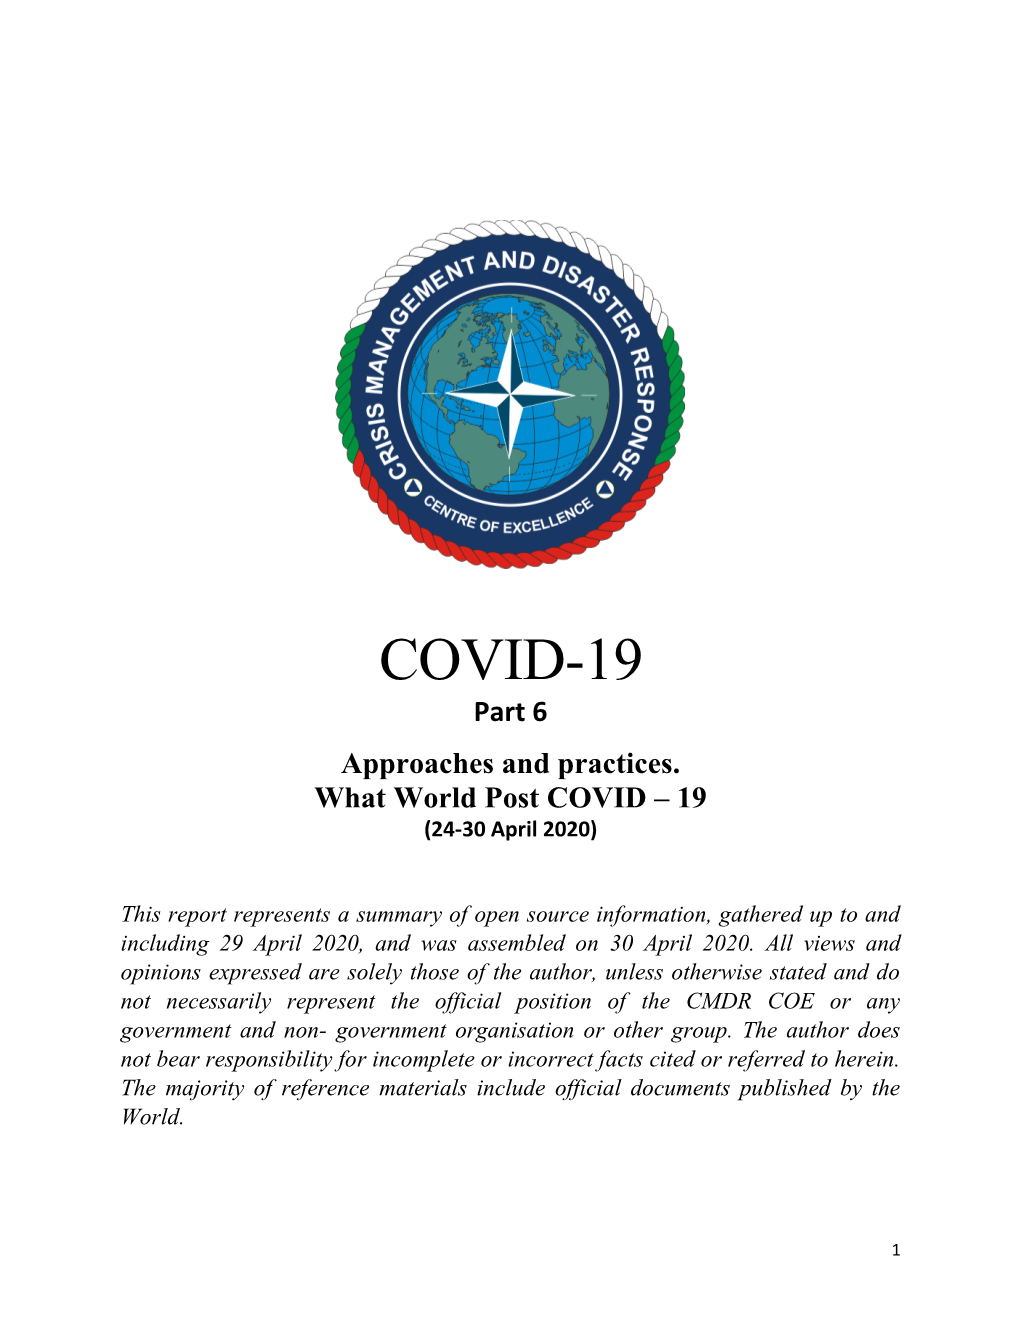 COVID 19 Is Likely to Be Under Control